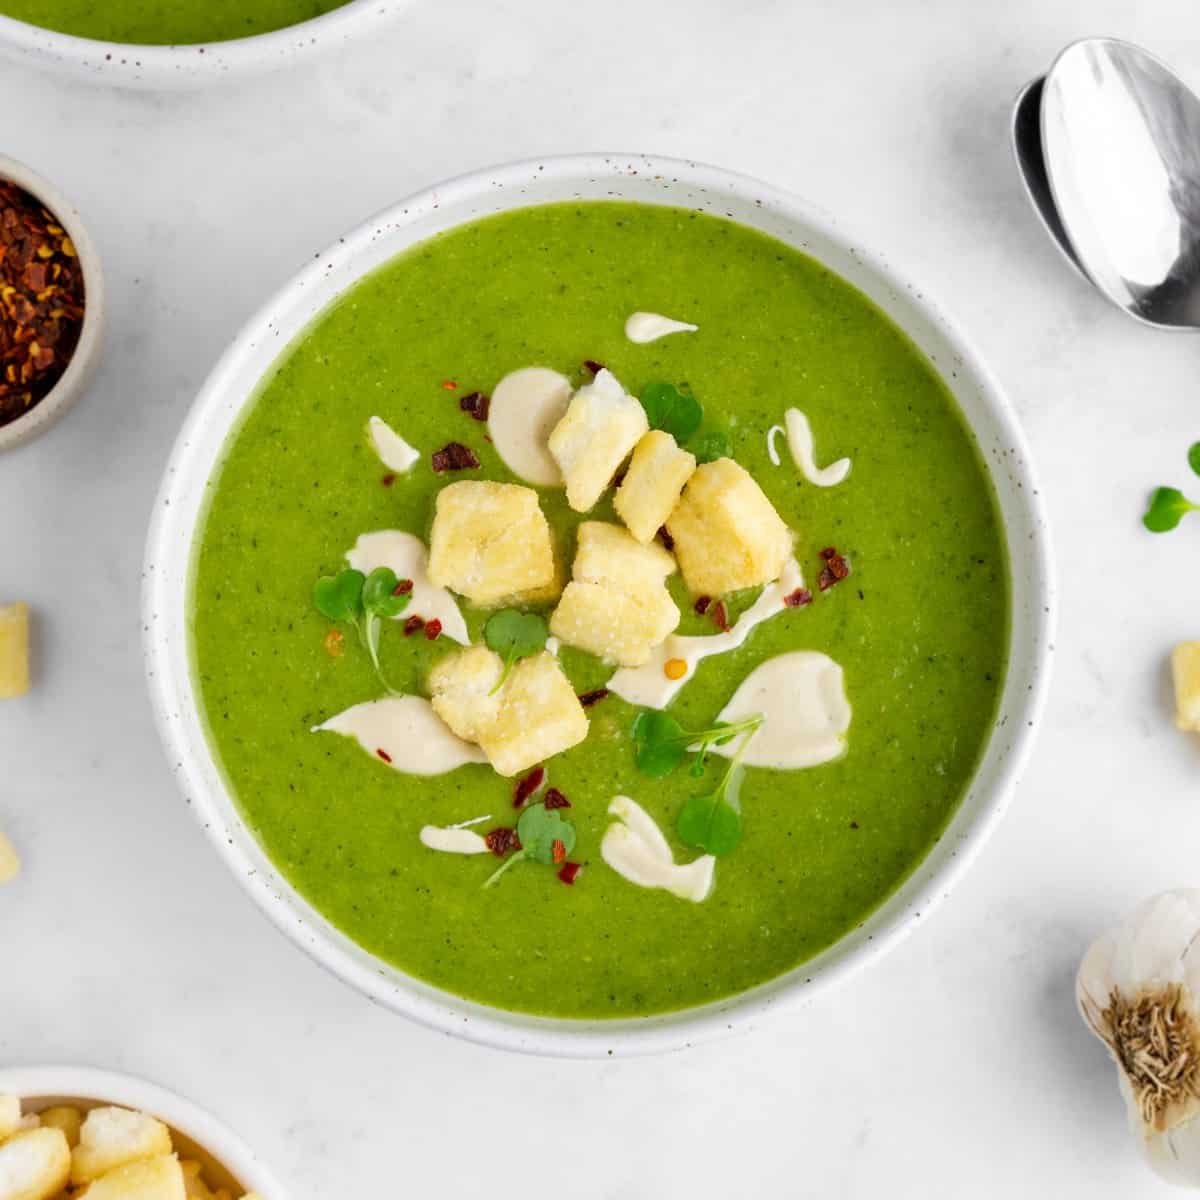 Creamy Green Pea Soup with Broccoli and Potatoes